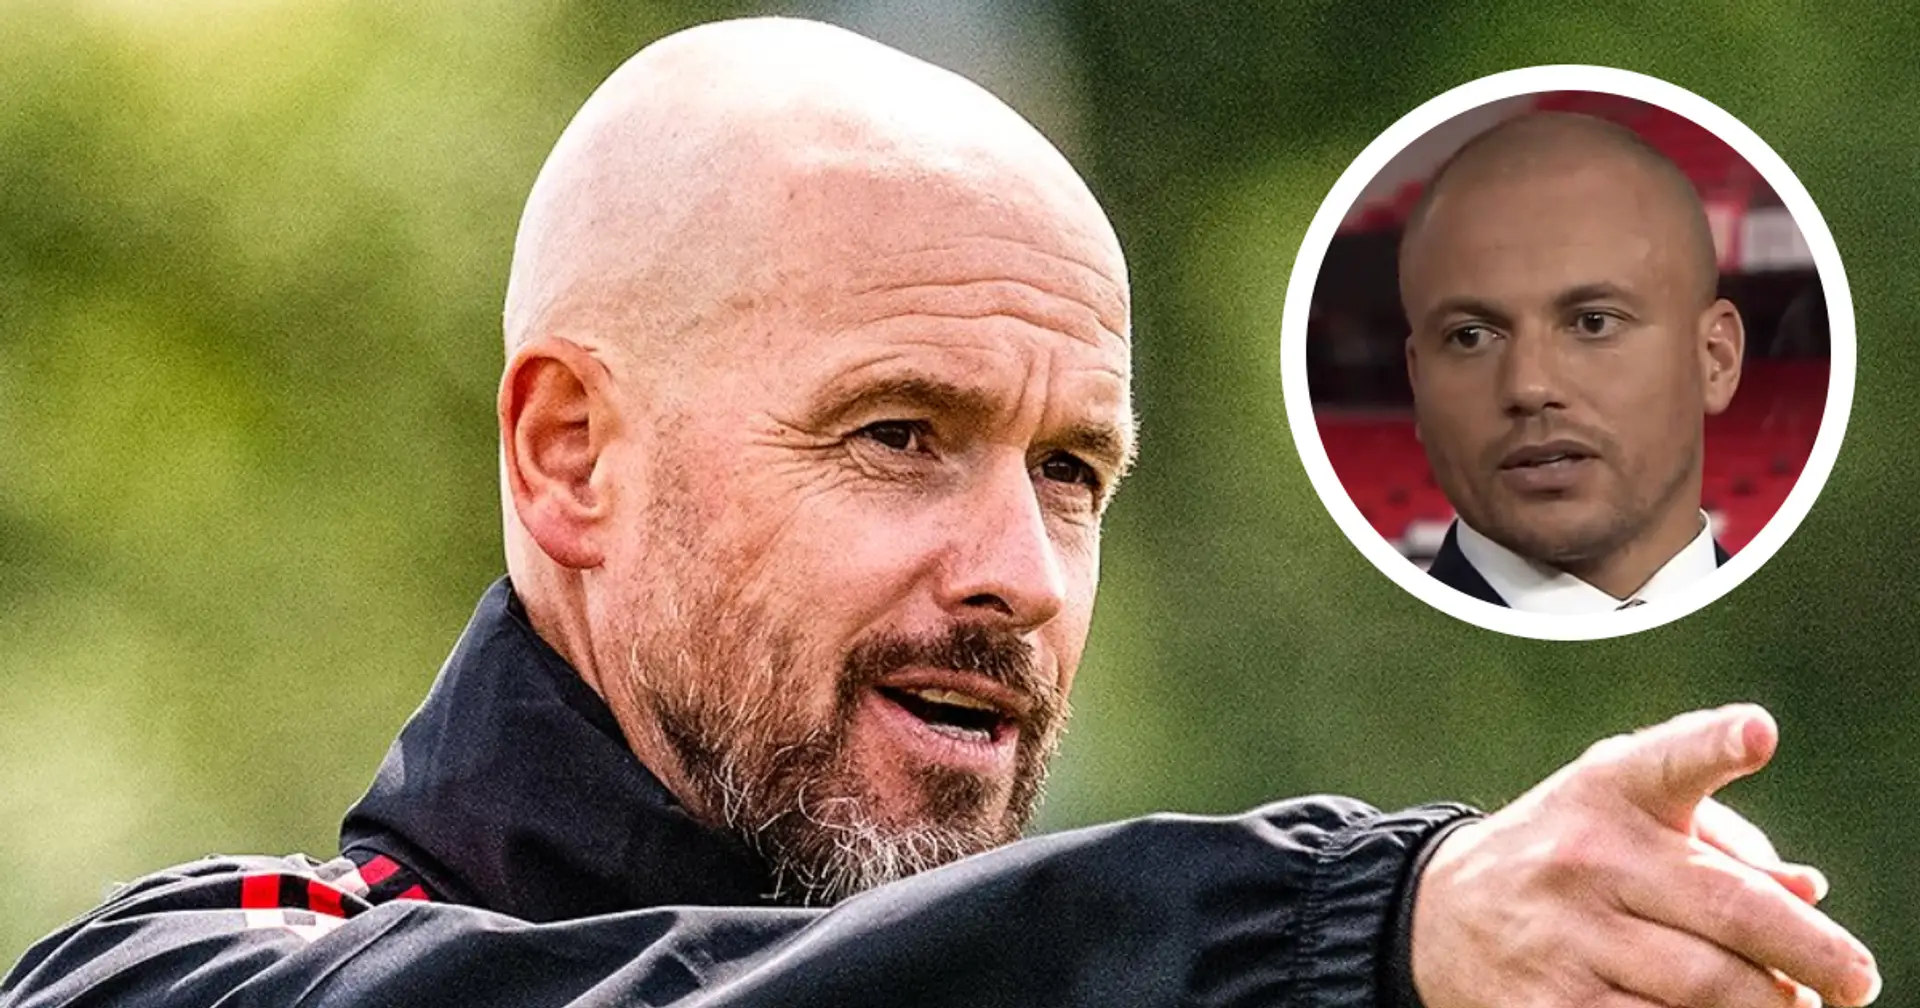 'He's known for playing youth': Wes Brown confident Man United's youngsters will shine under Ten Hag